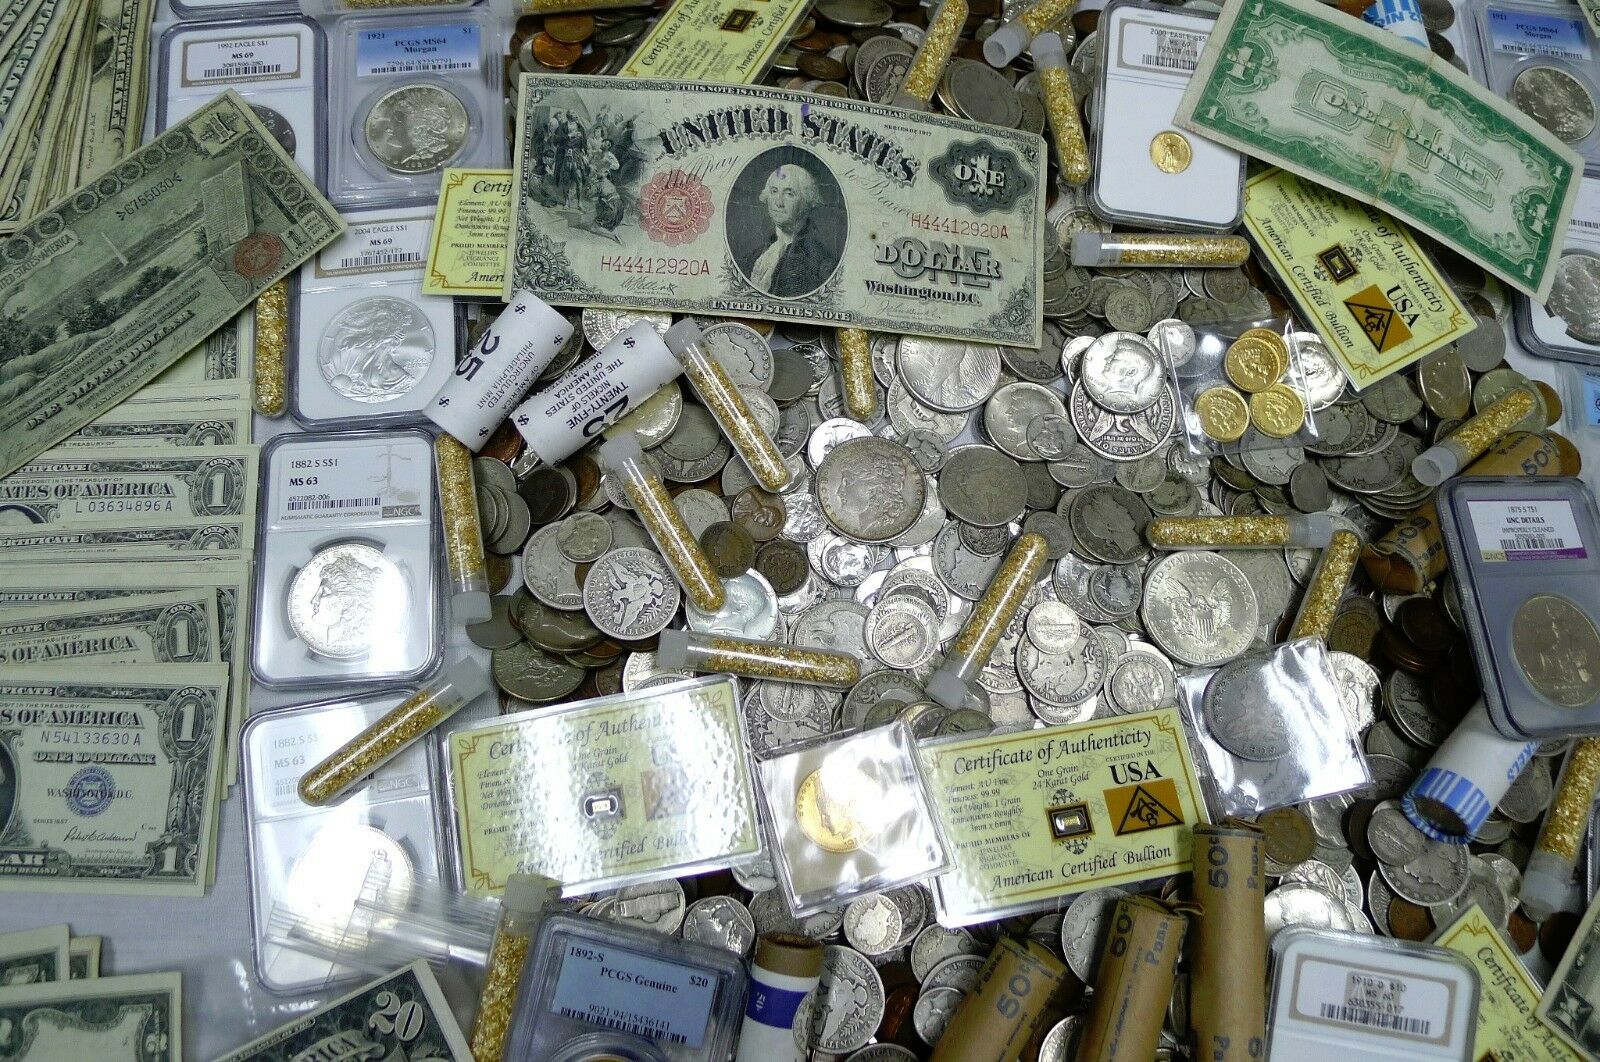 Gigantic 100+ Coin Estate Lot! Ngc,pcgs,gold,silver,currency,rolls,antique,more!